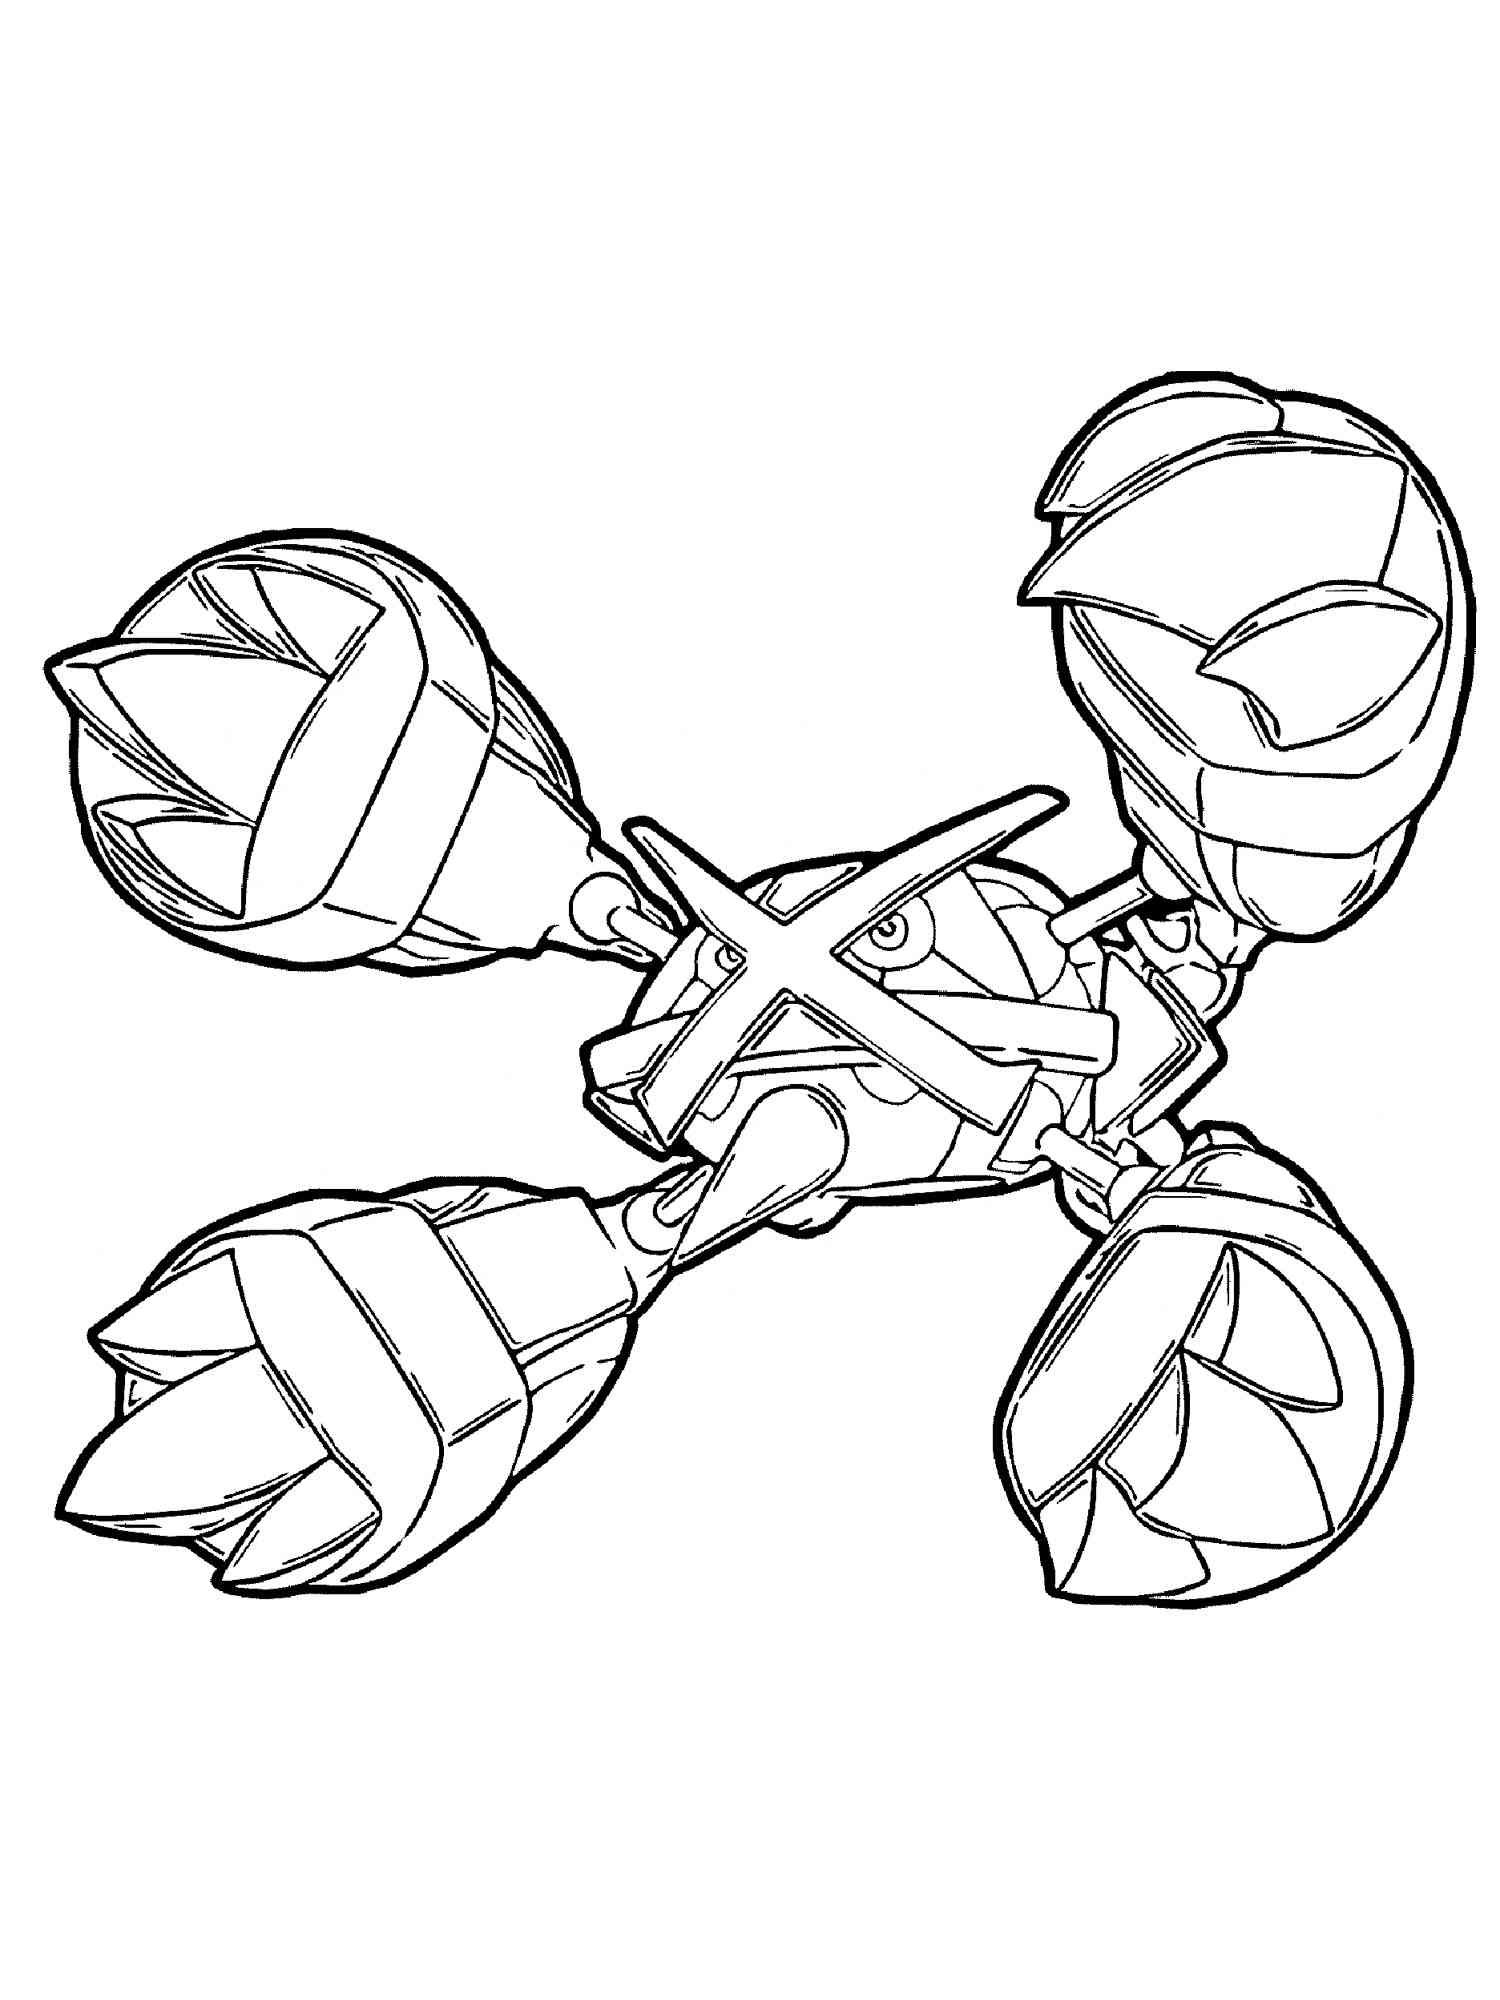 Metagross From Pokemon Coloring Pages Xcolorings Vrogue Co